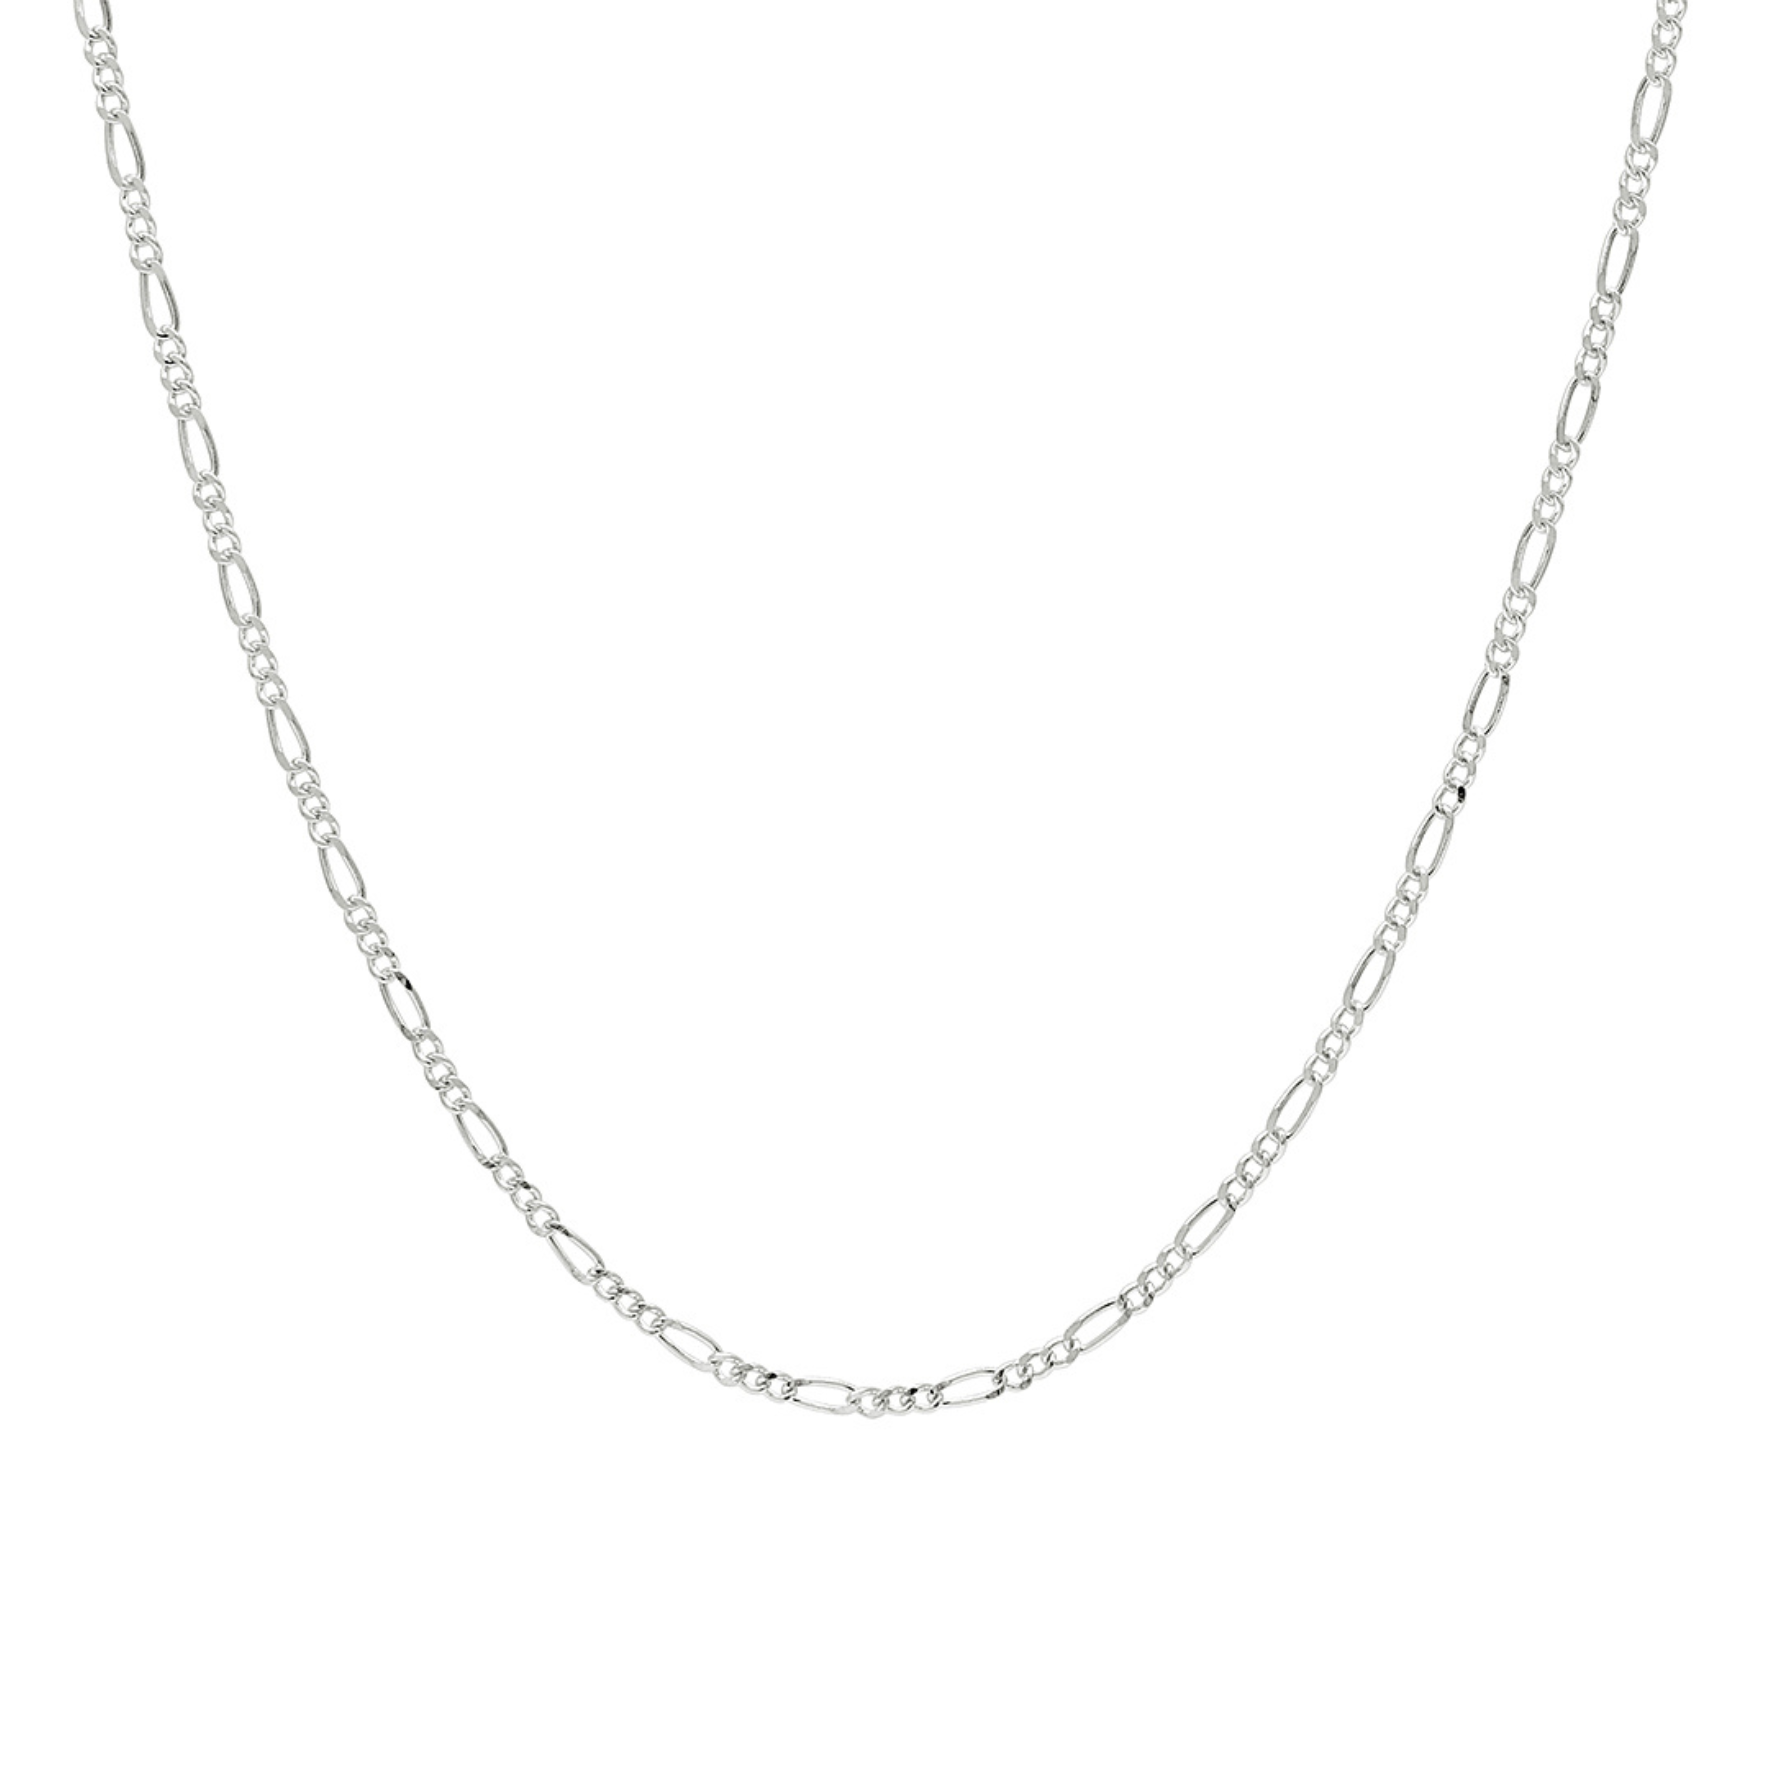 Frida Figaro Necklace from A-Hjort Jewellery in Silver Sterling 925